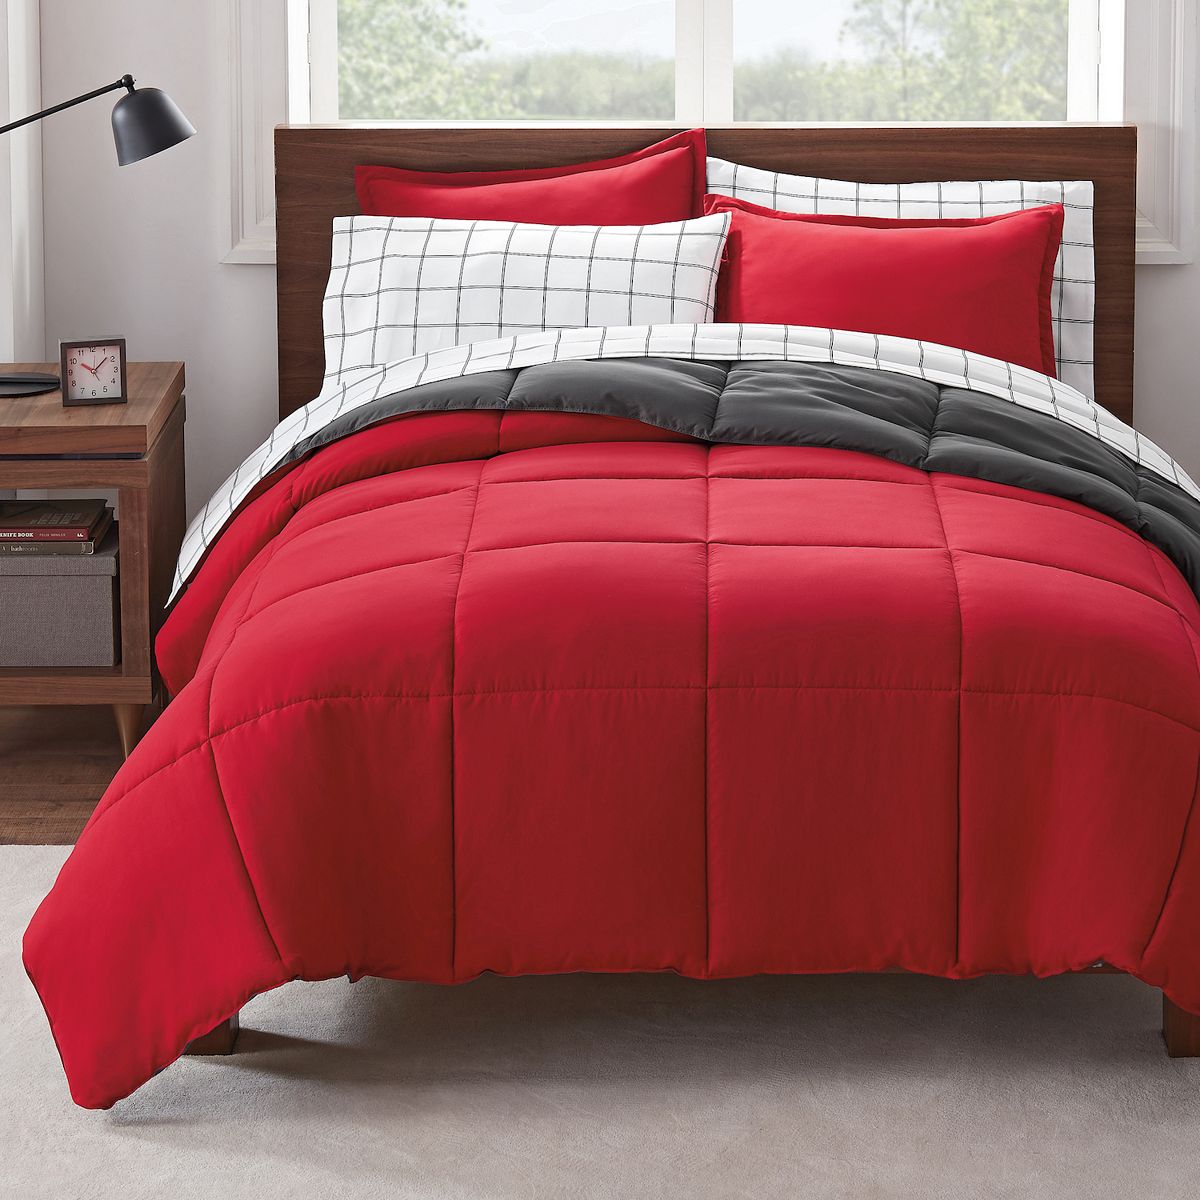 Serta® Simply Clean Antimicrobial Reversible Comforter Set with Sheets $22.50